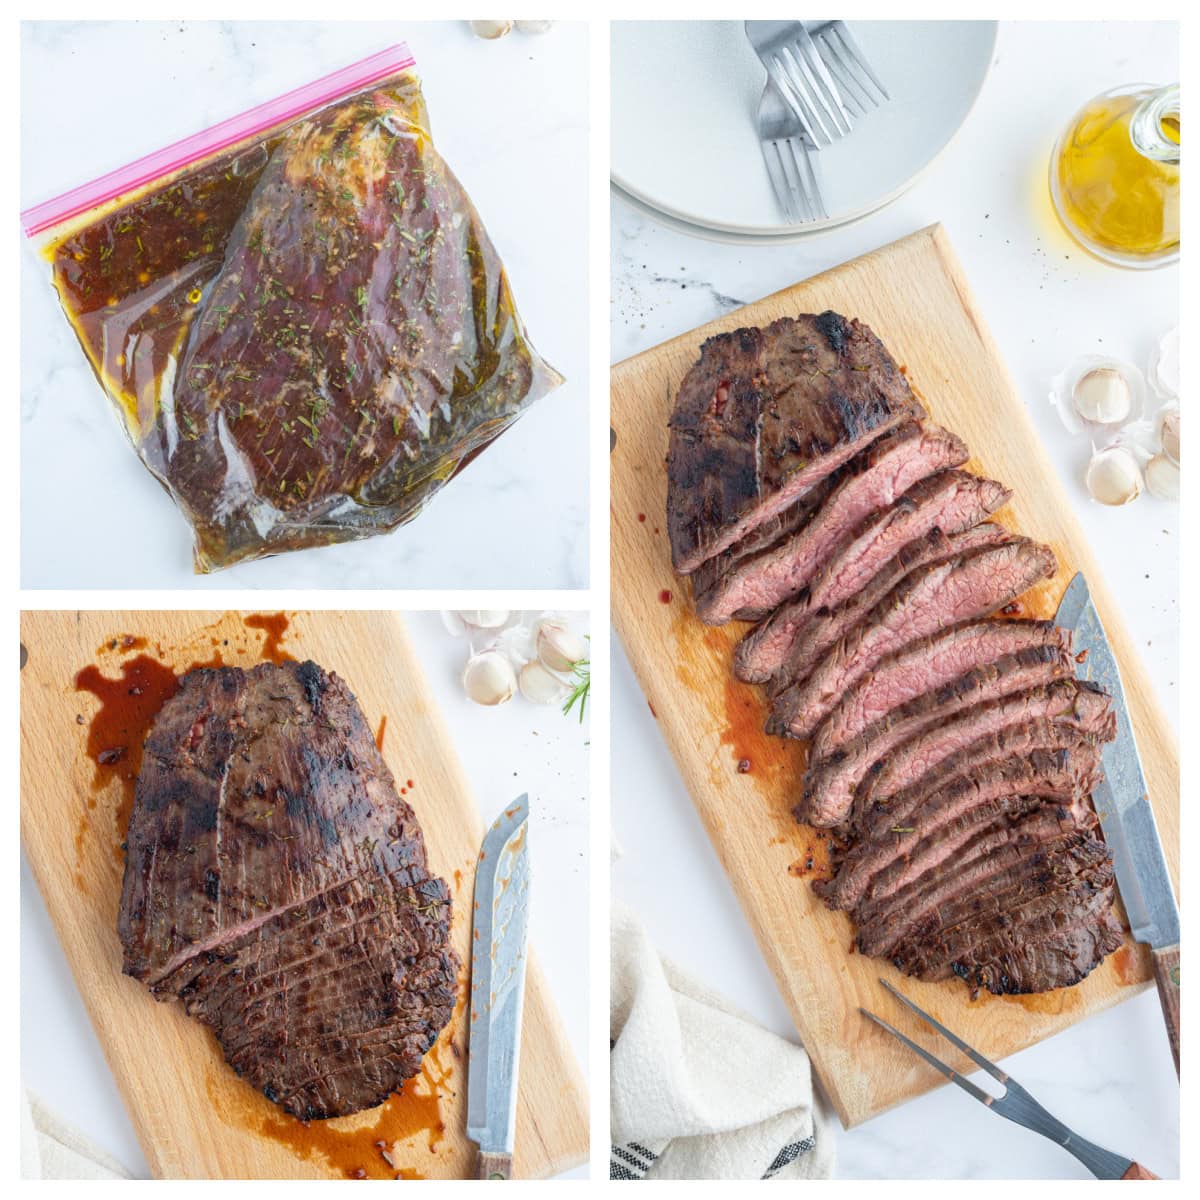 four photos showing marinated flank steak with rosemary and then grilled and sliced